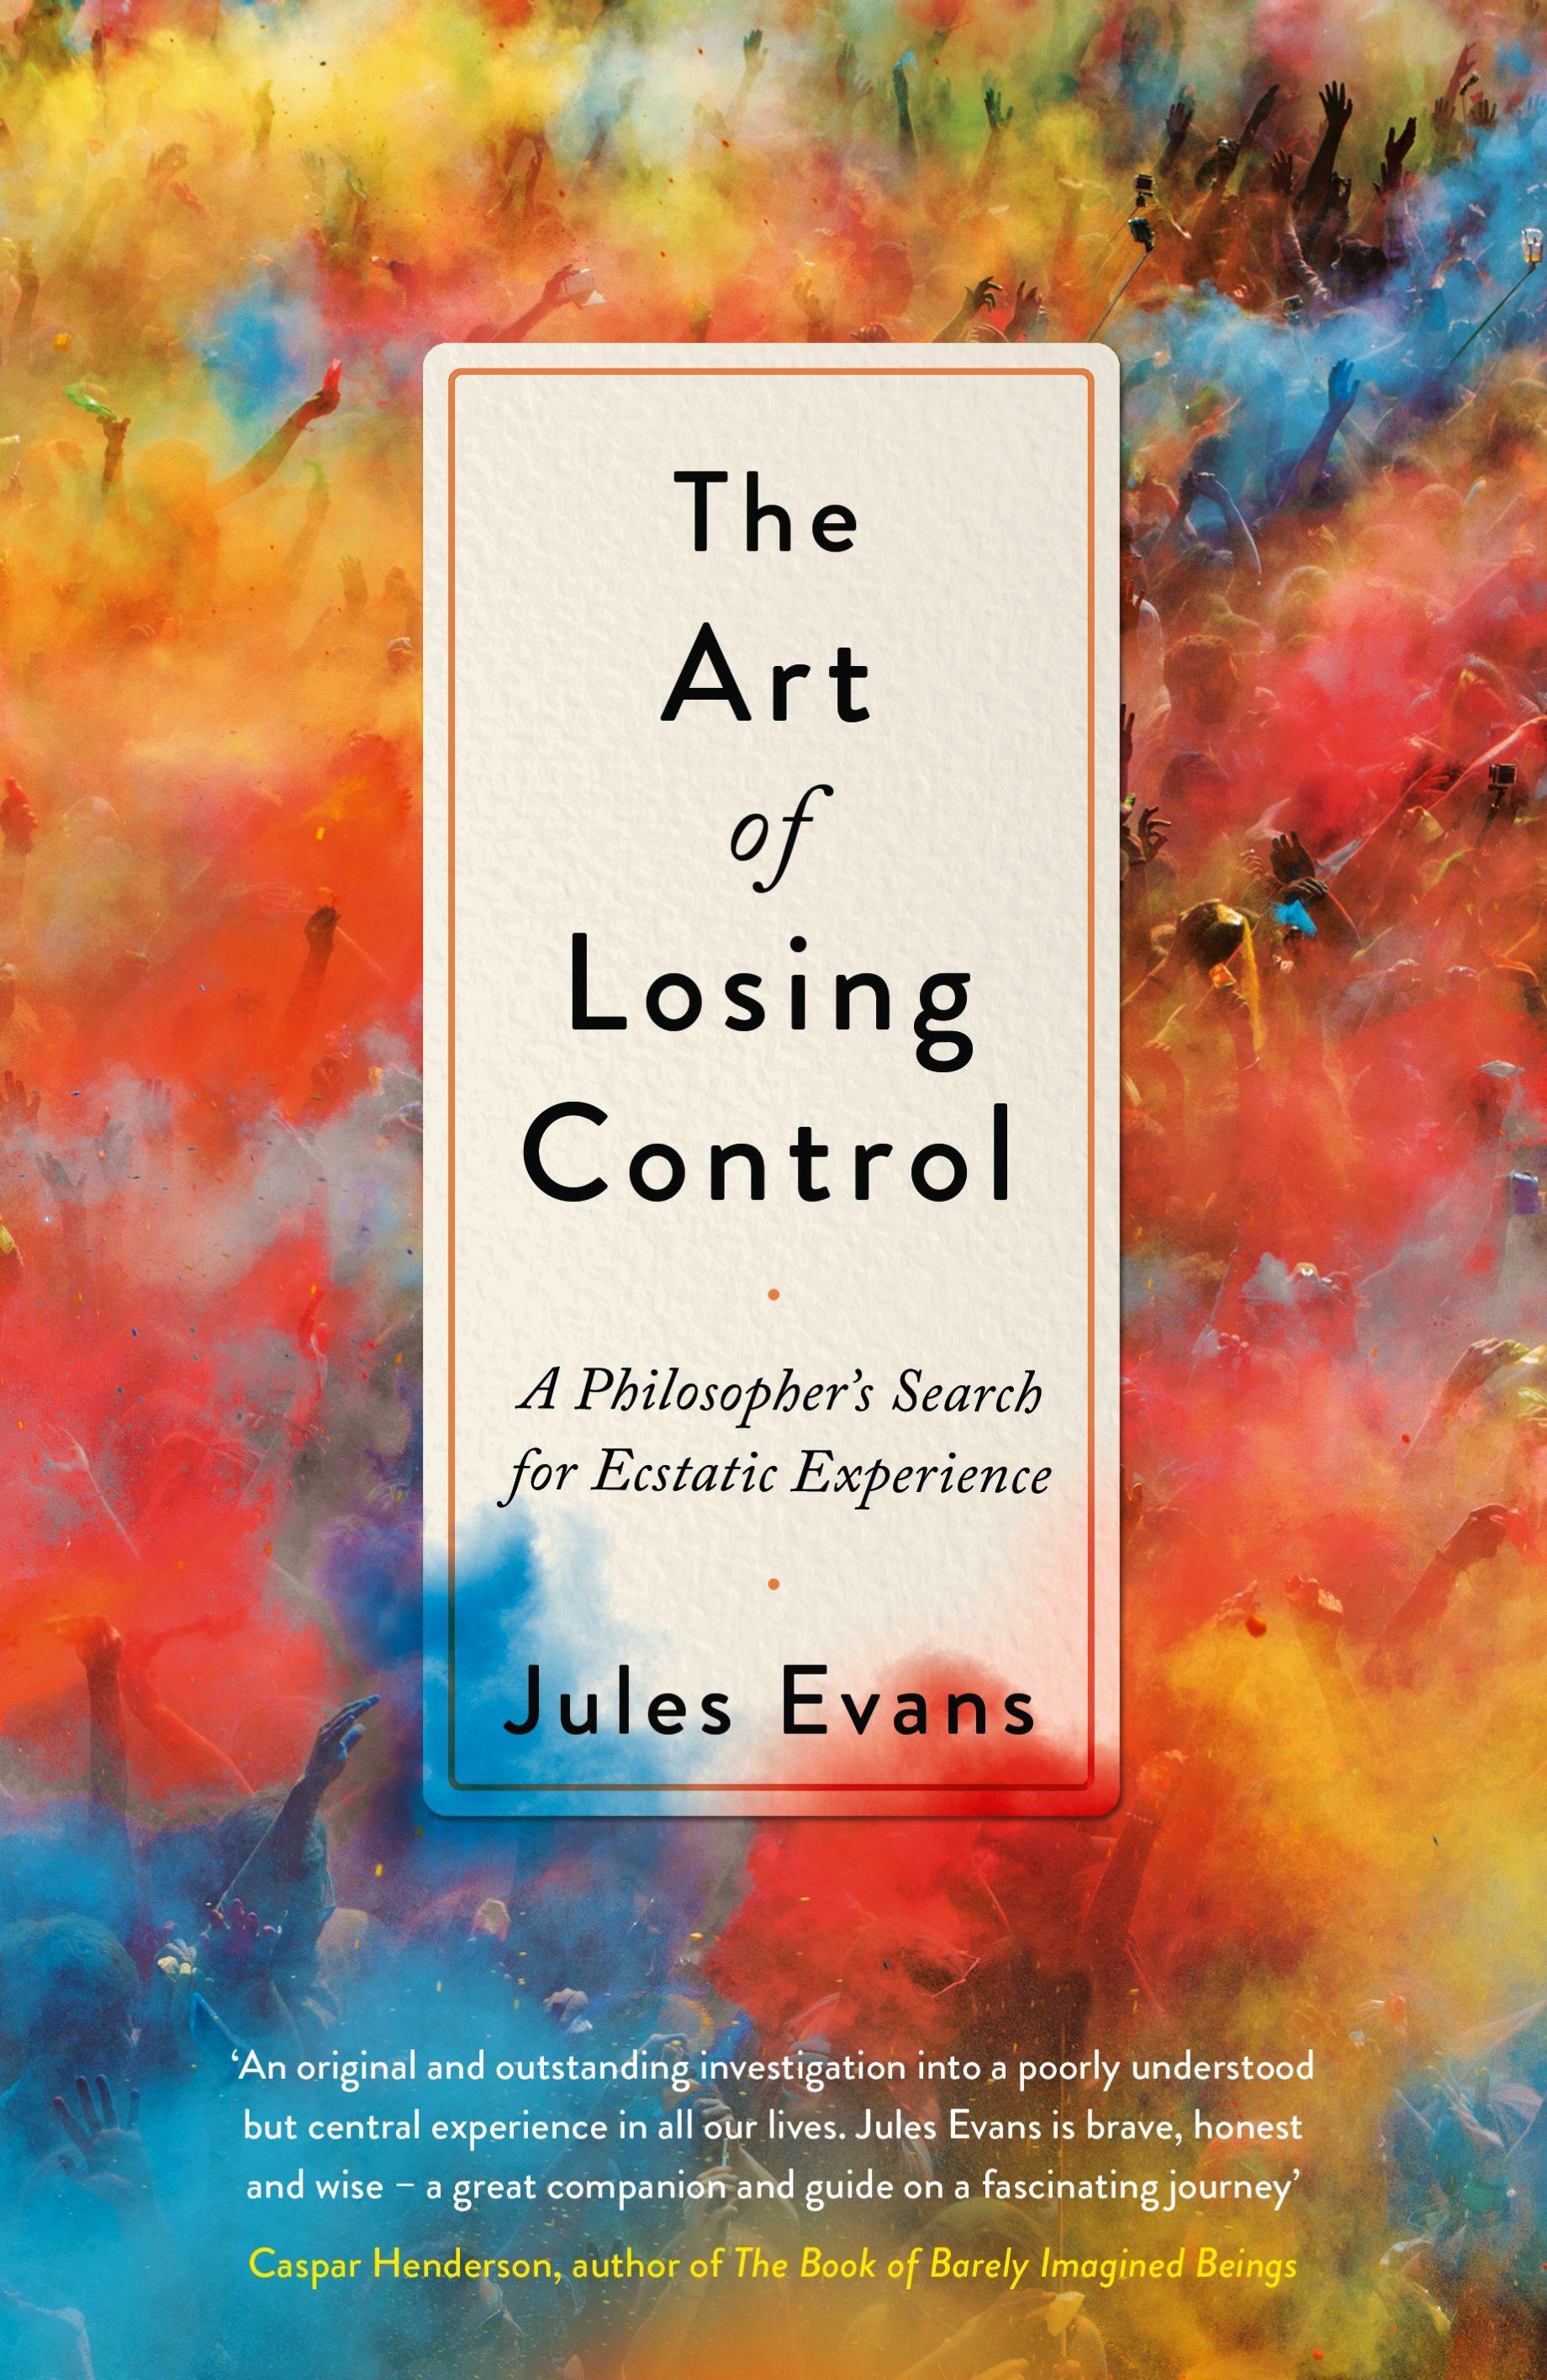 Art of Losing Control: The Philosopher's Search for Ecstatic Experience